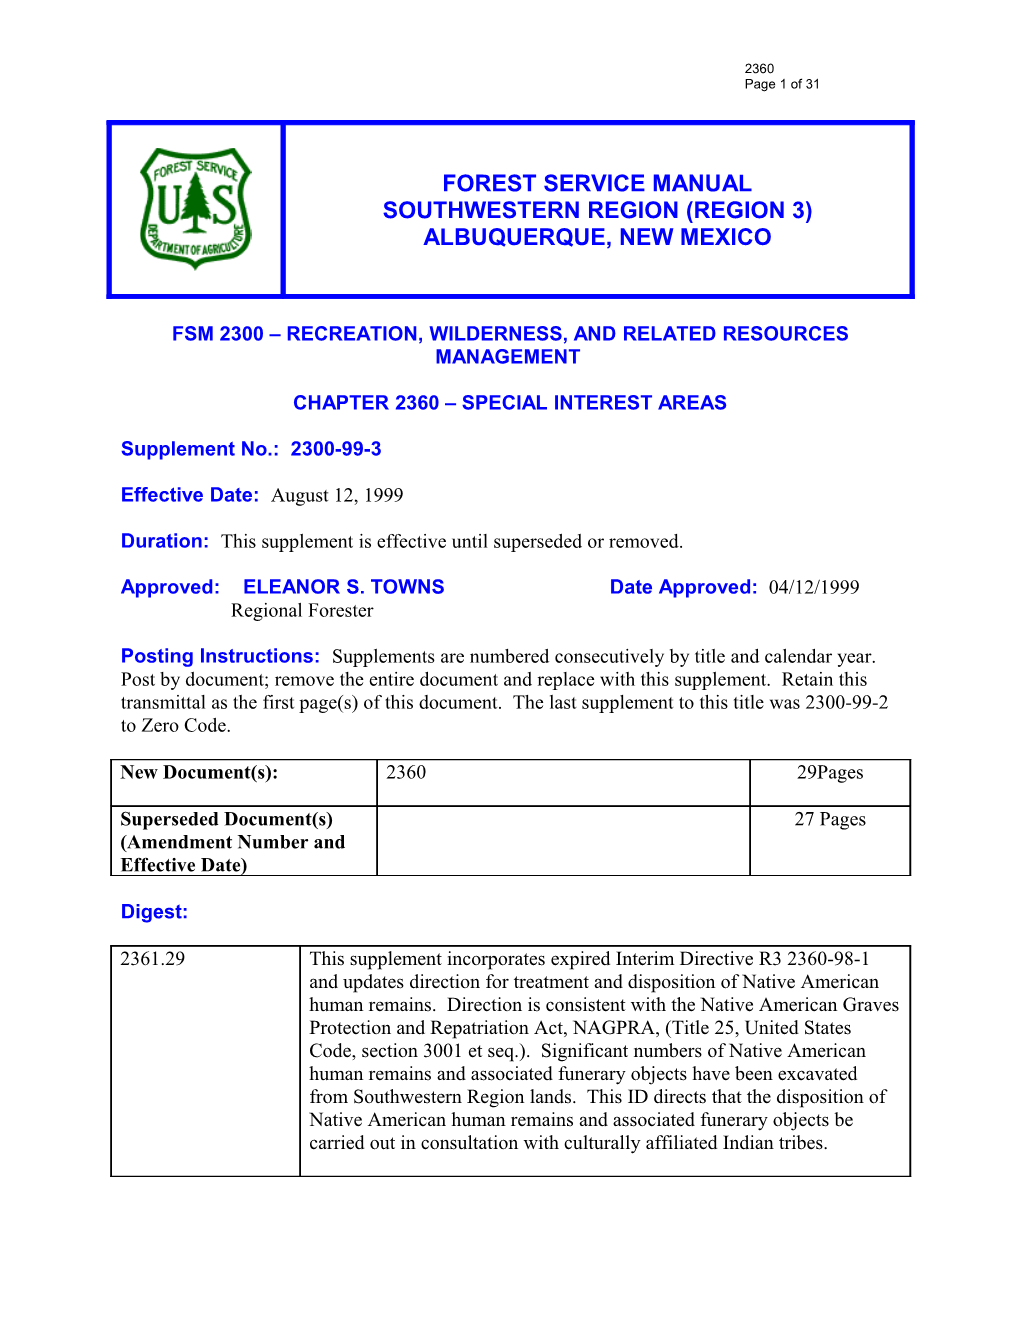 Fsm 2300 Recreation, Wilderness, and Related Resources Management